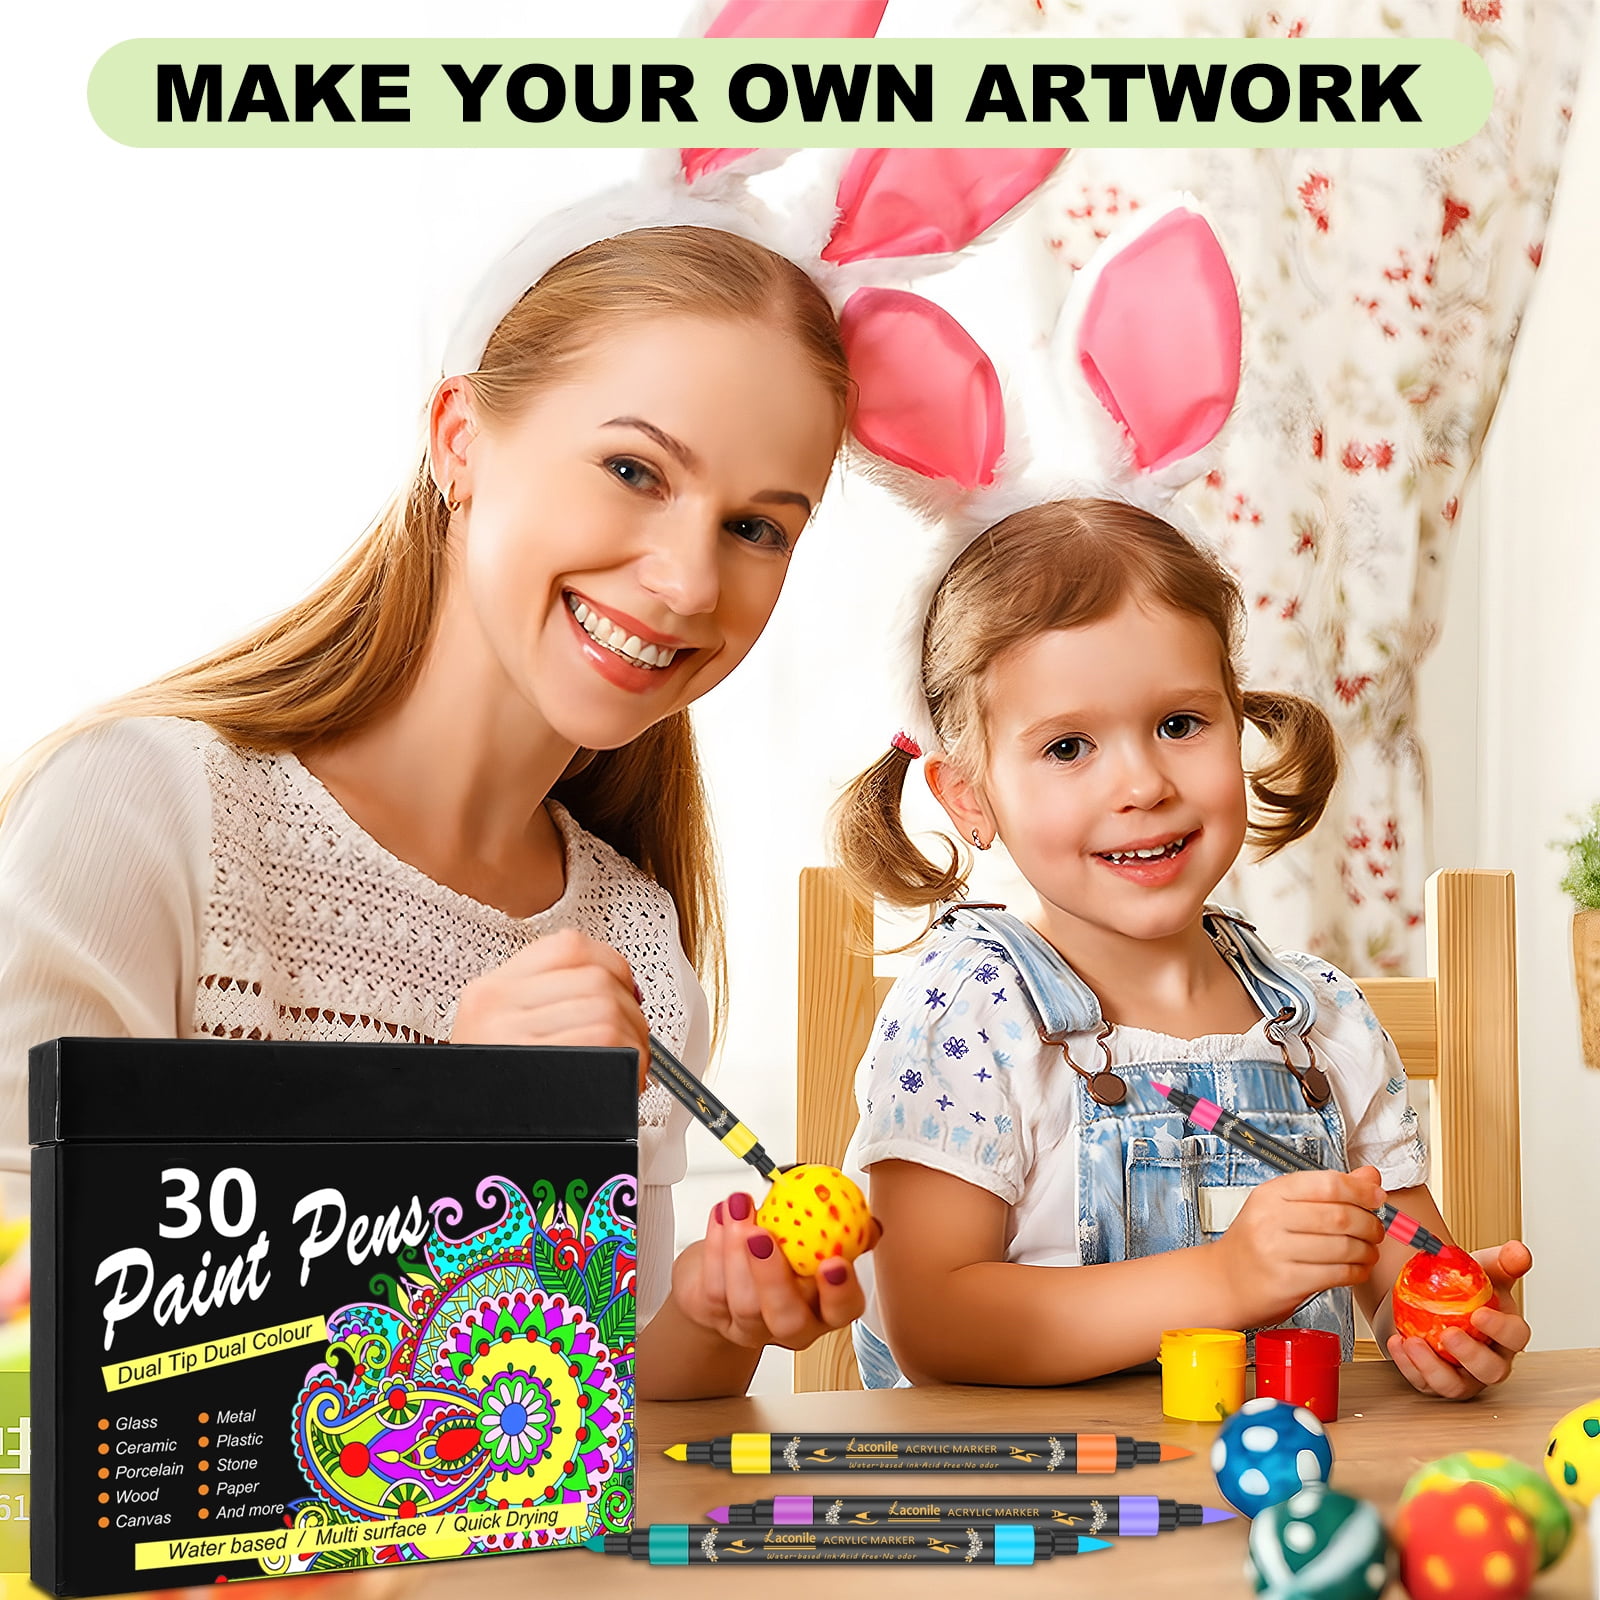 Gunsamg 42 Color Art Acrylic Paint Markers, Great Gift for Kids